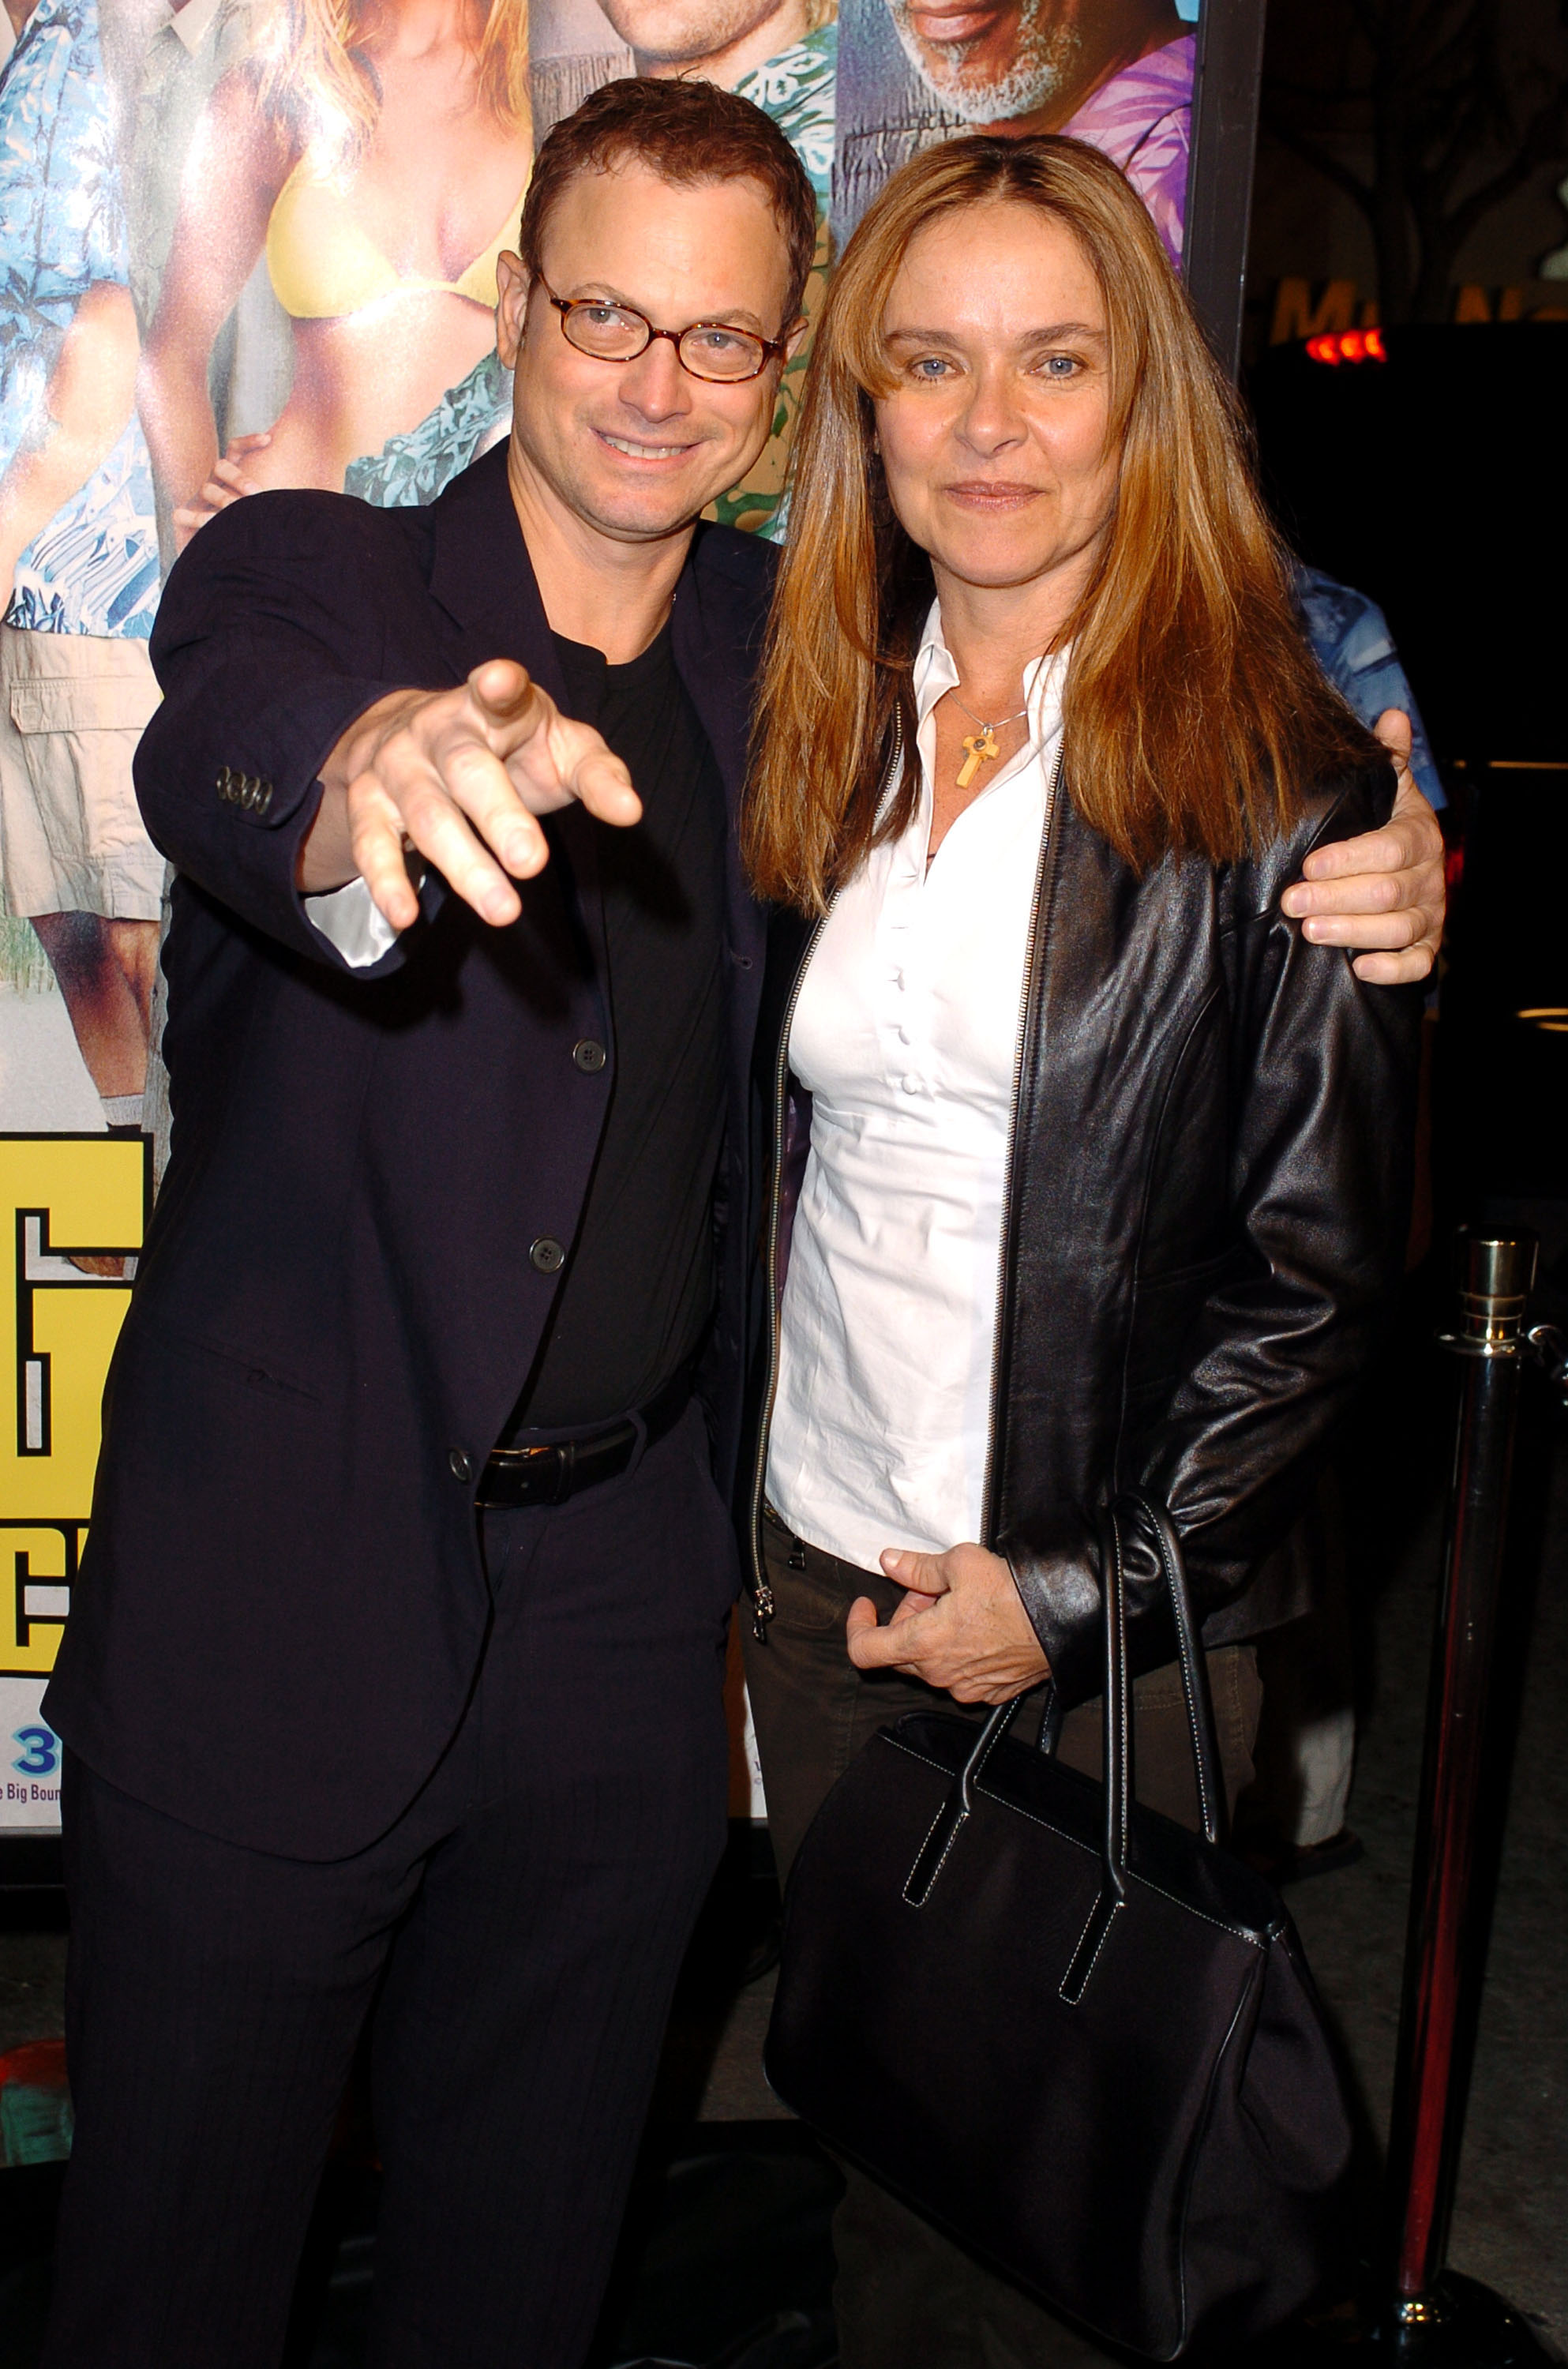 Gary Sinise and Moira Harris during "The Big Bounce" Premiere at Mann Village Theatre in Westwood, California, on January 29, 2004. | Source: Getty Images